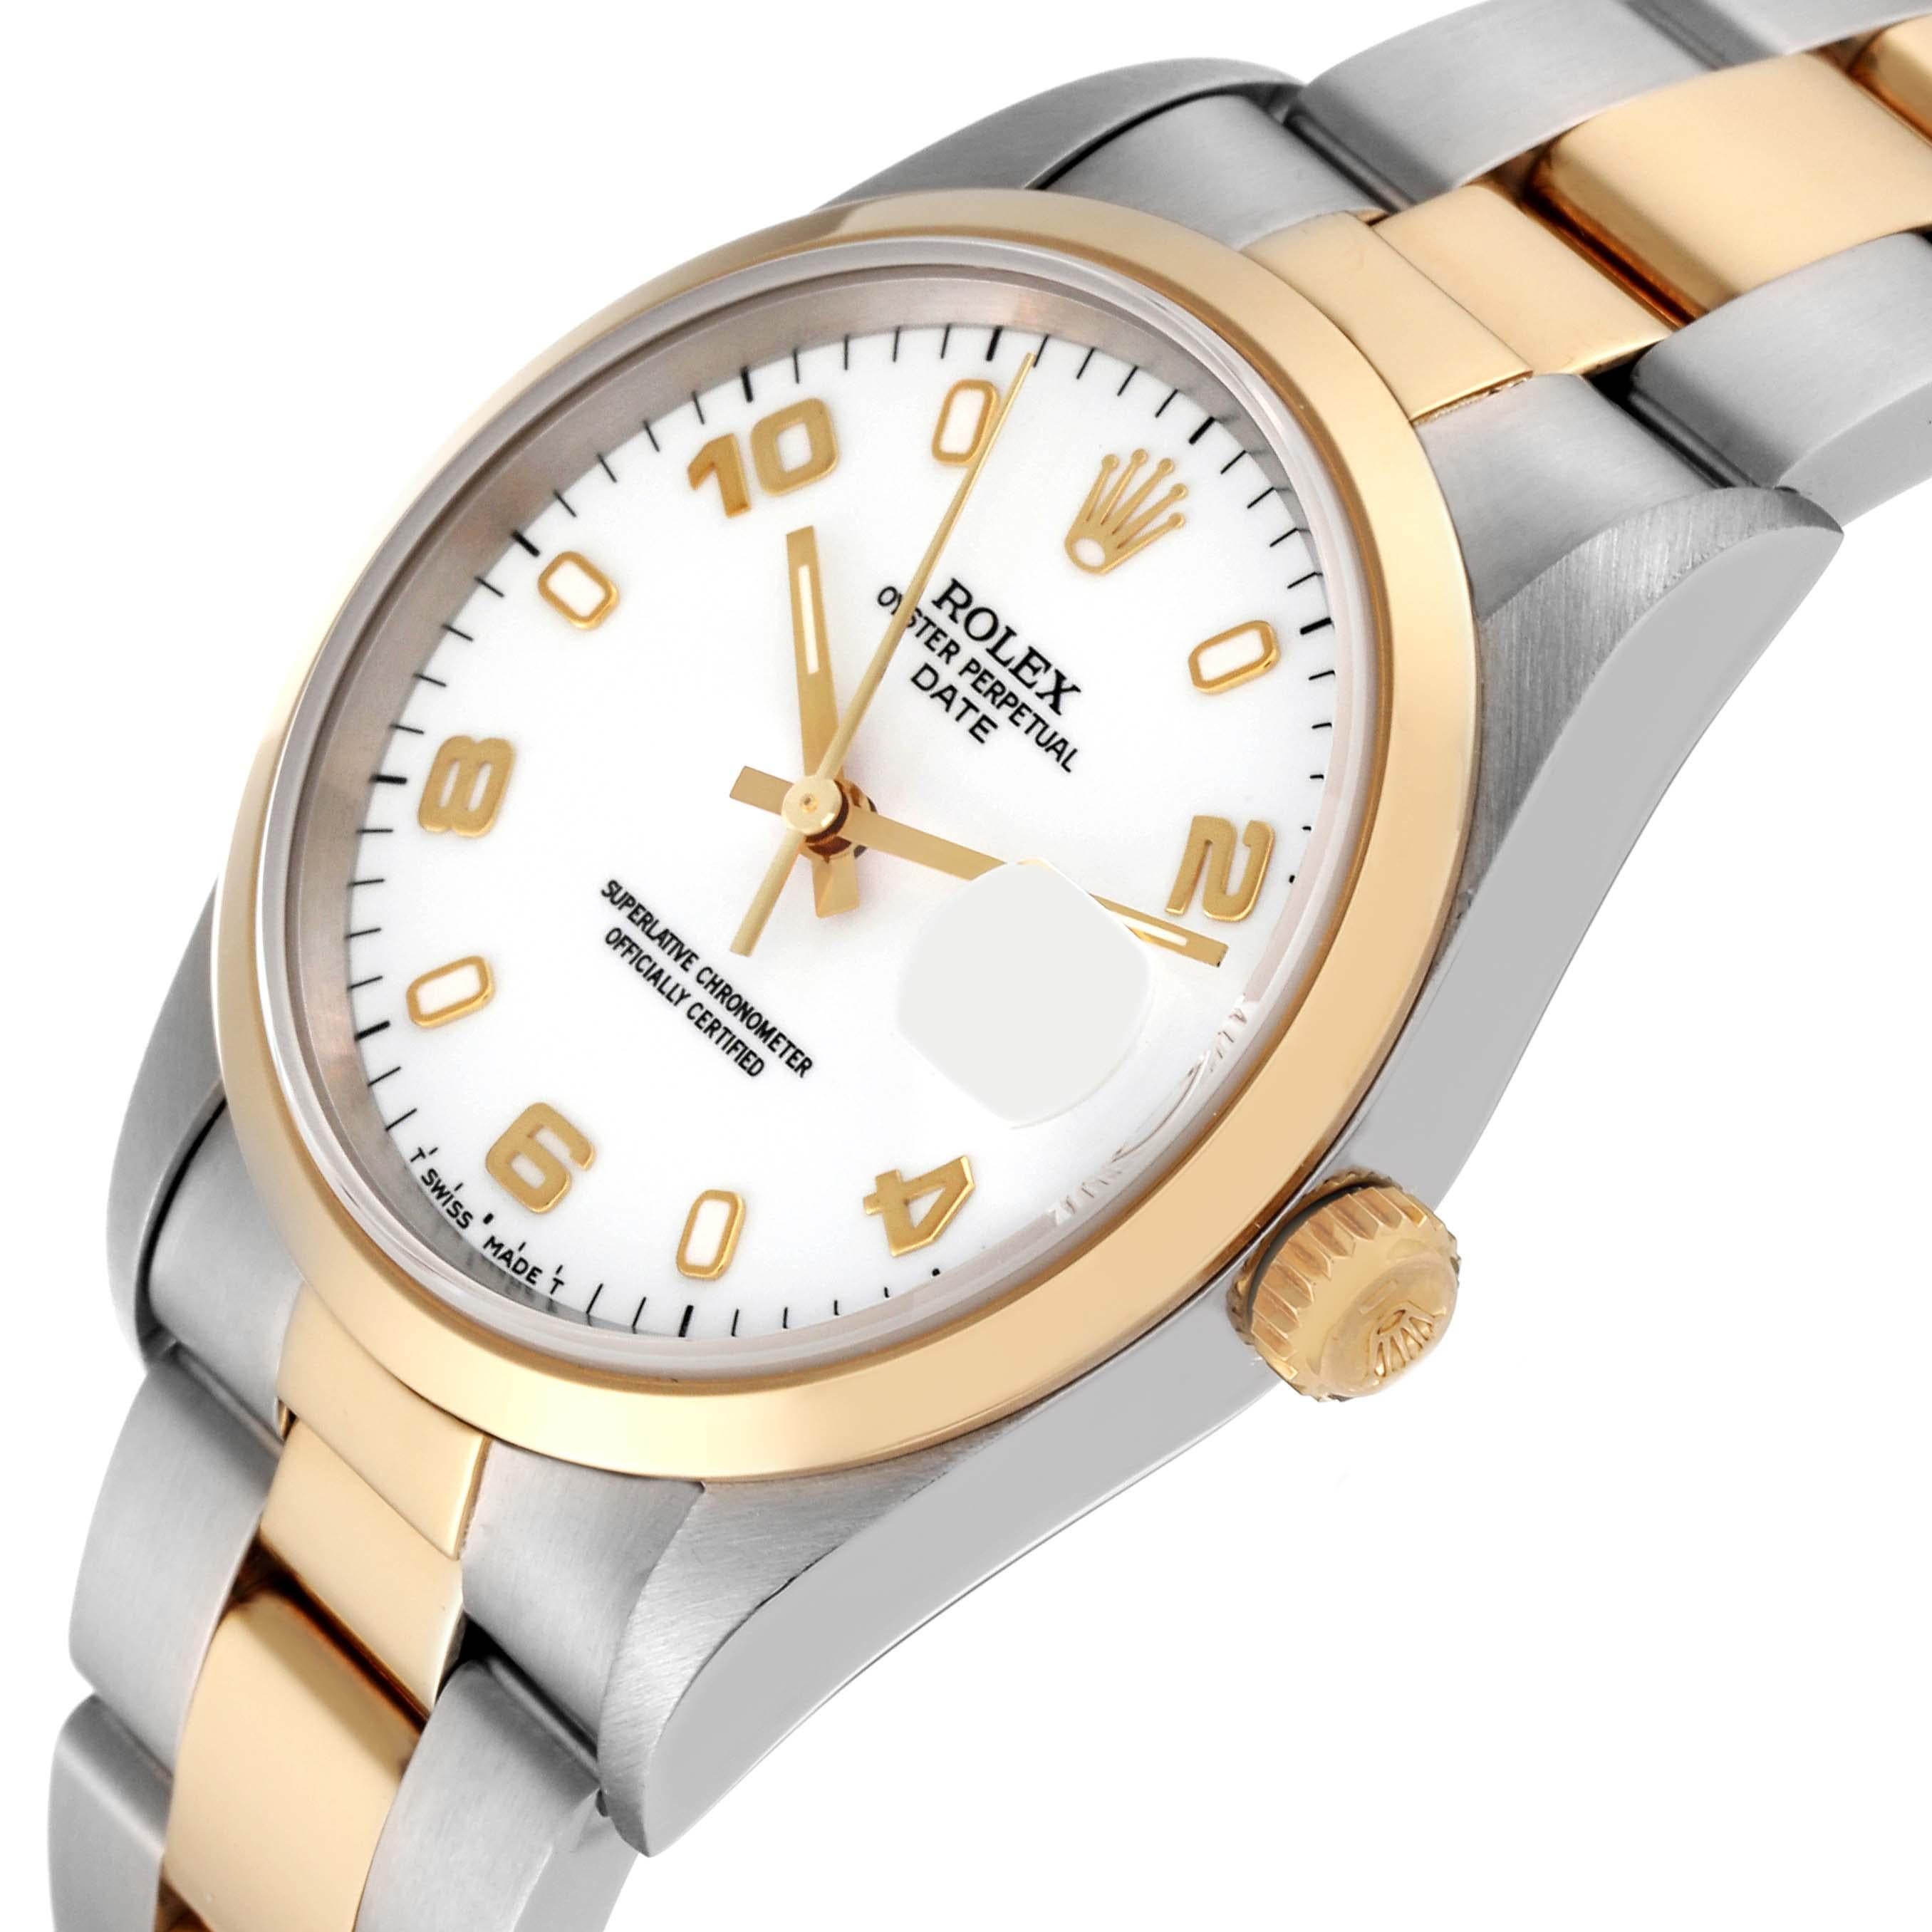 Rolex Date Steel Yellow Gold White Dial Mens Watch 15203 Box Papers en vente 1